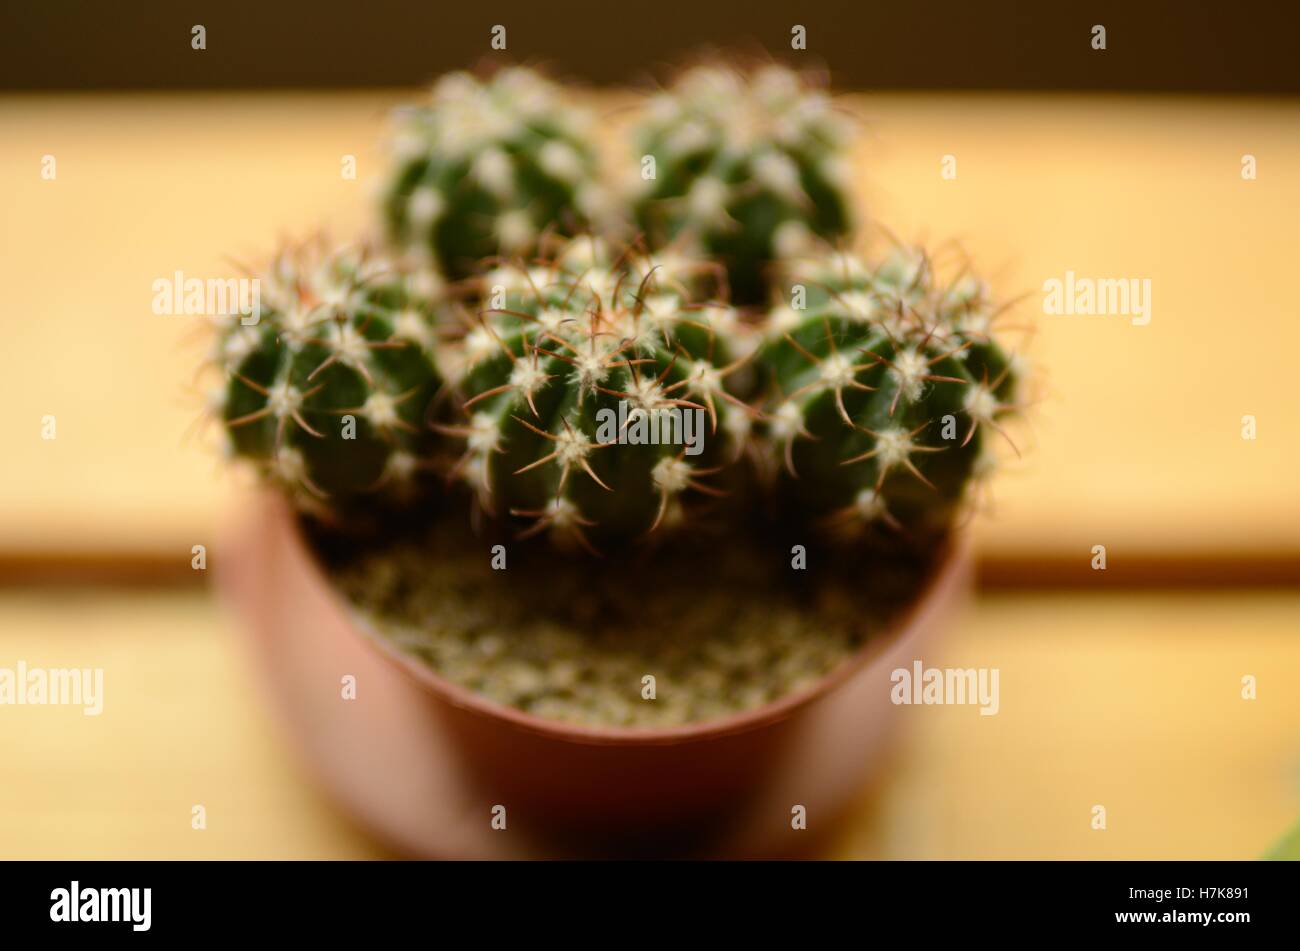 Five seedlings of Melocactus matanzanus, photographed at low f-number for highlighting the front part and blurring the rest. Stock Photo